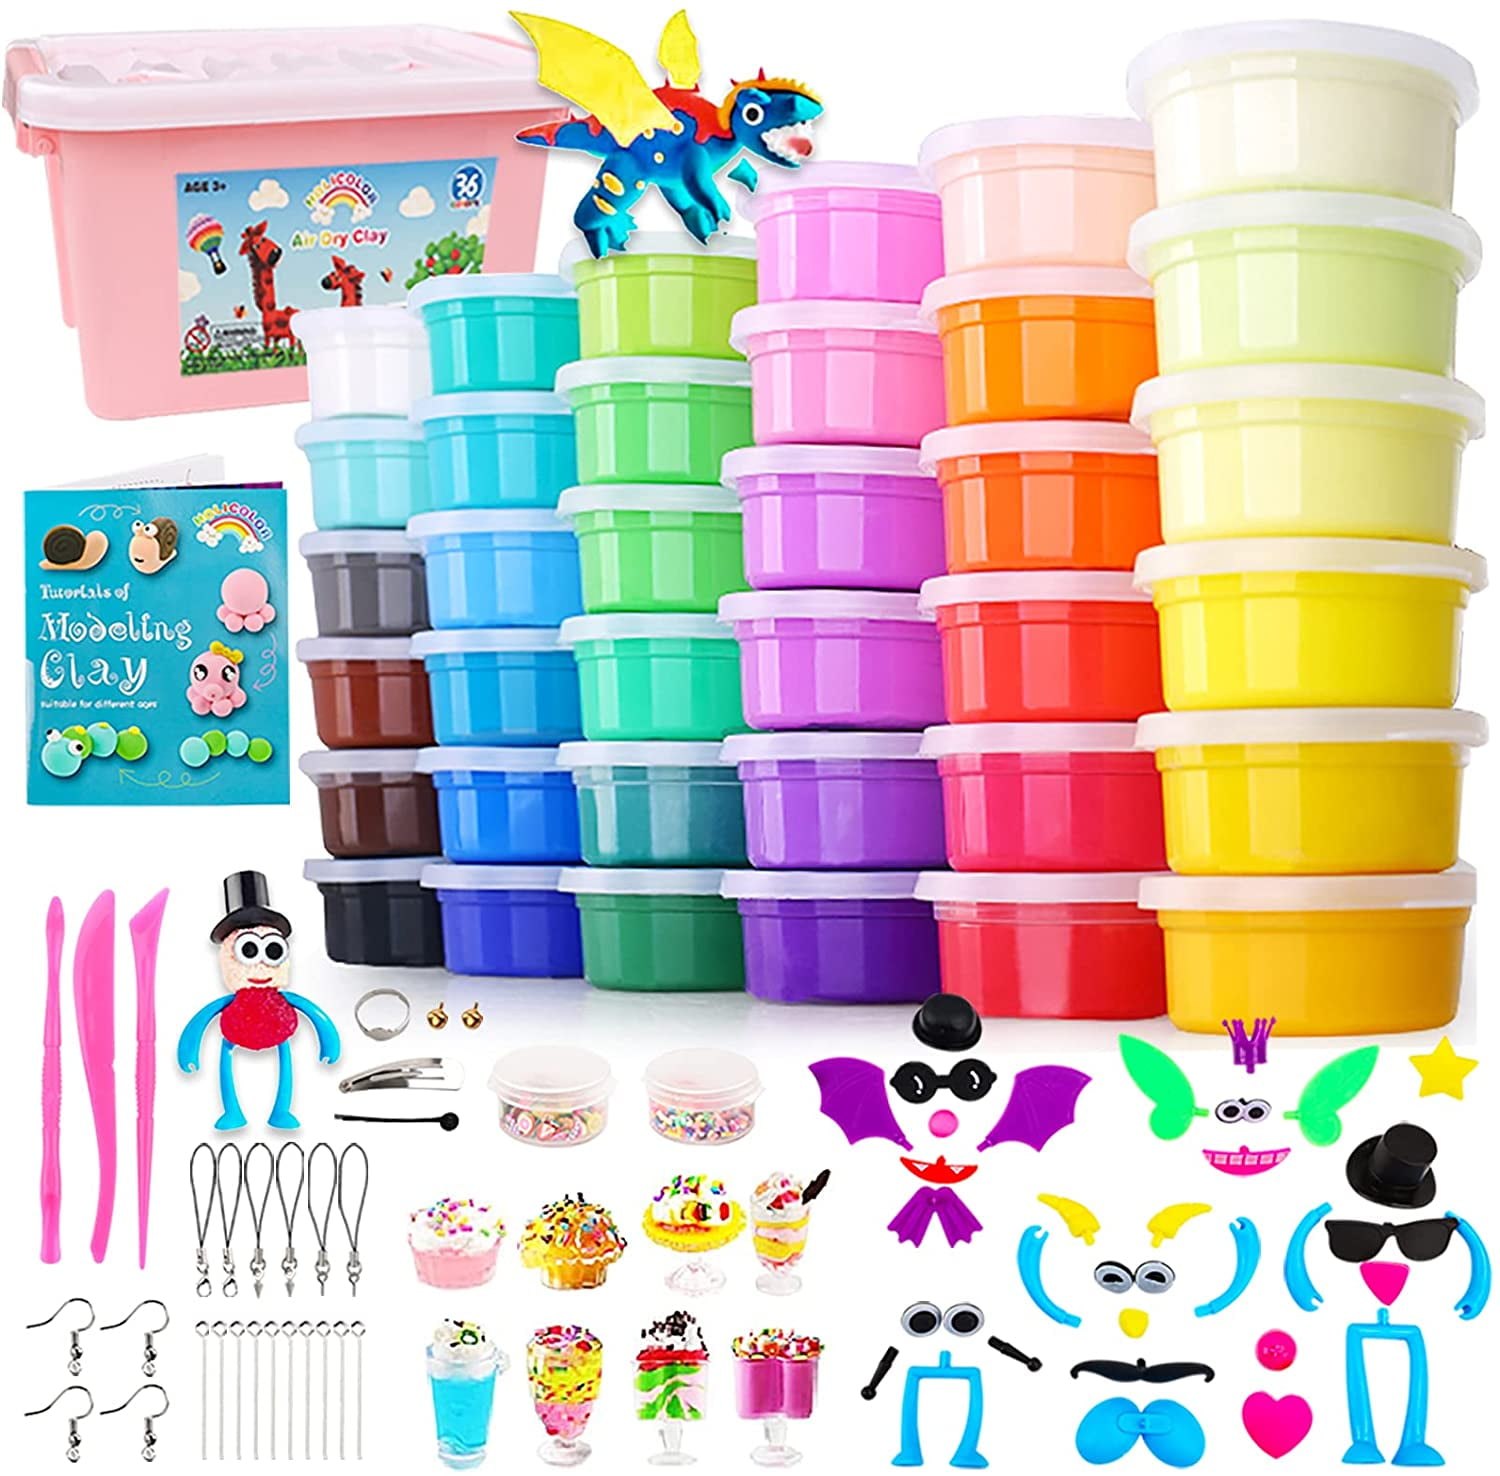 36 Colors Air Dry Modeling Clay Set, Children's Handmade Diy Space Mud  Ultralight Plasticine, Educational Sculpting Tools And Diy Crafts